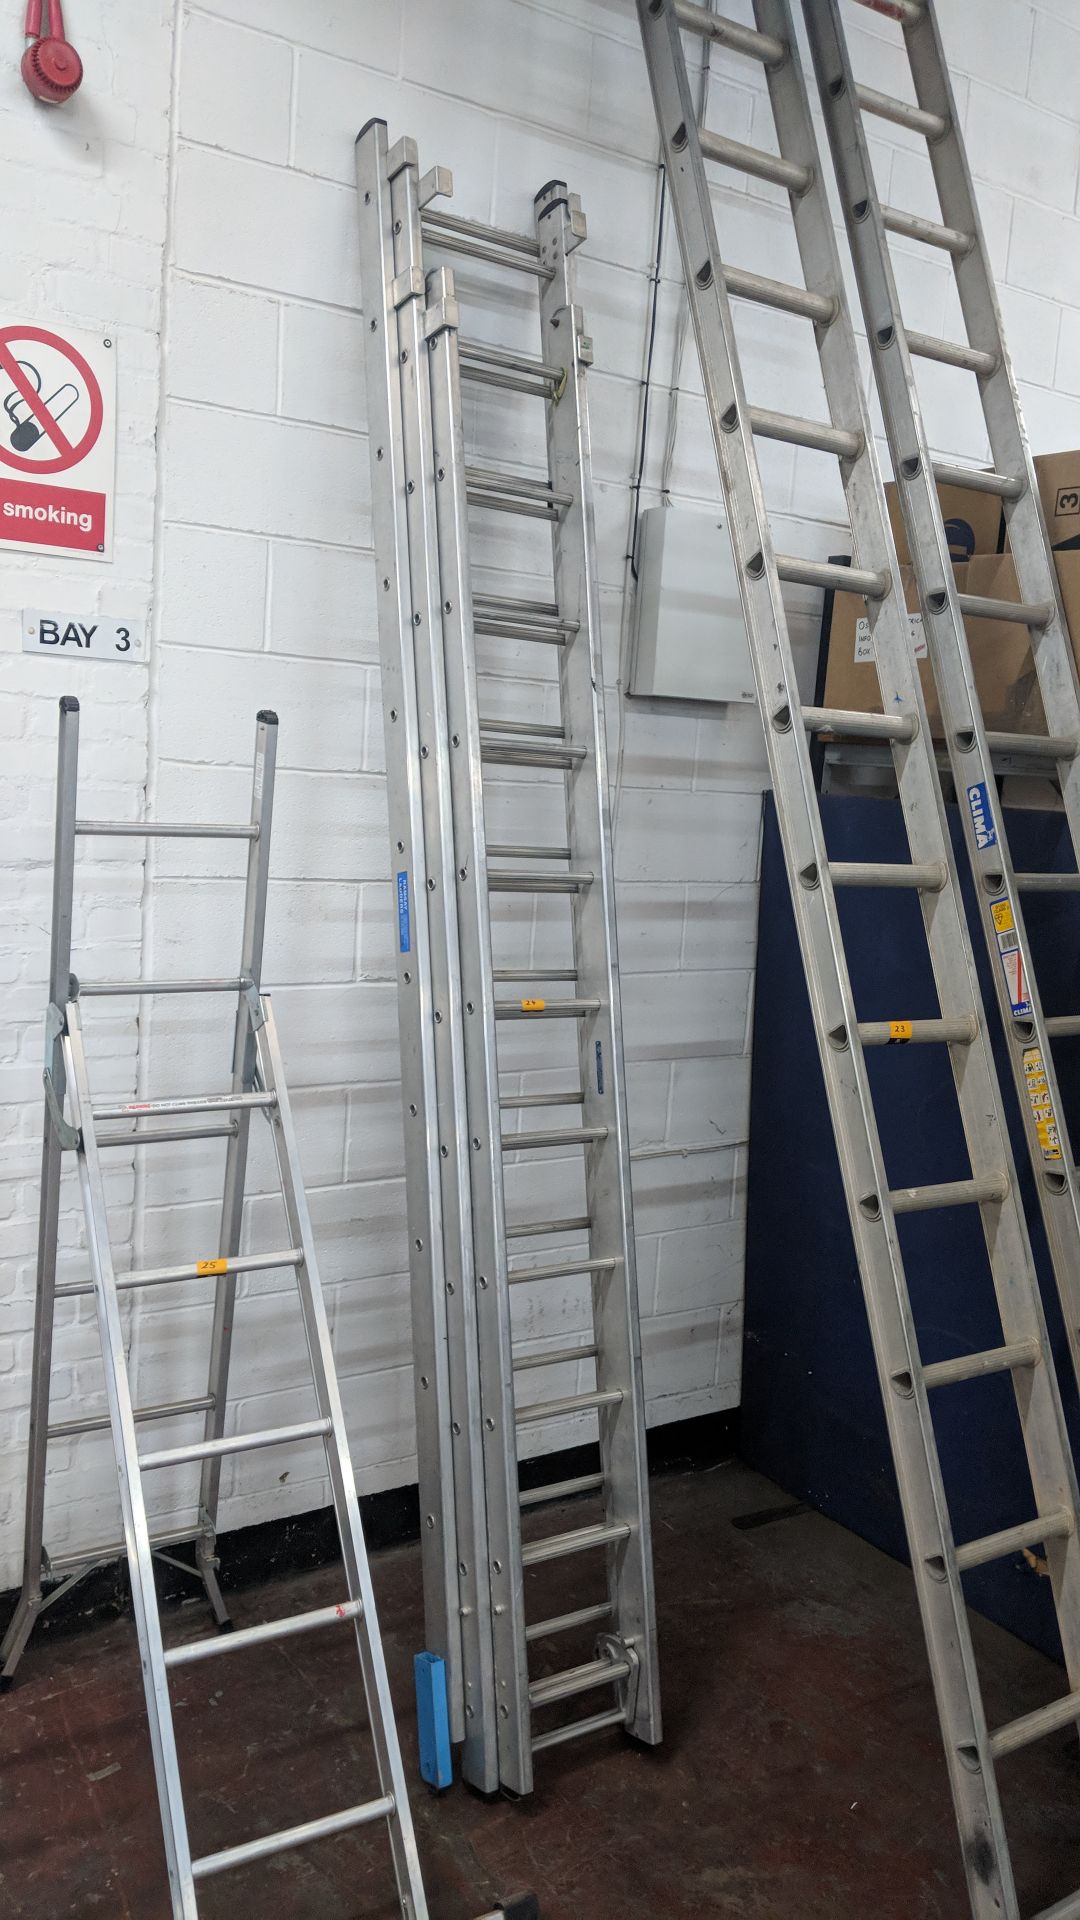 Set of triple rung ladders, the longest section measuring approx. 3200mm long